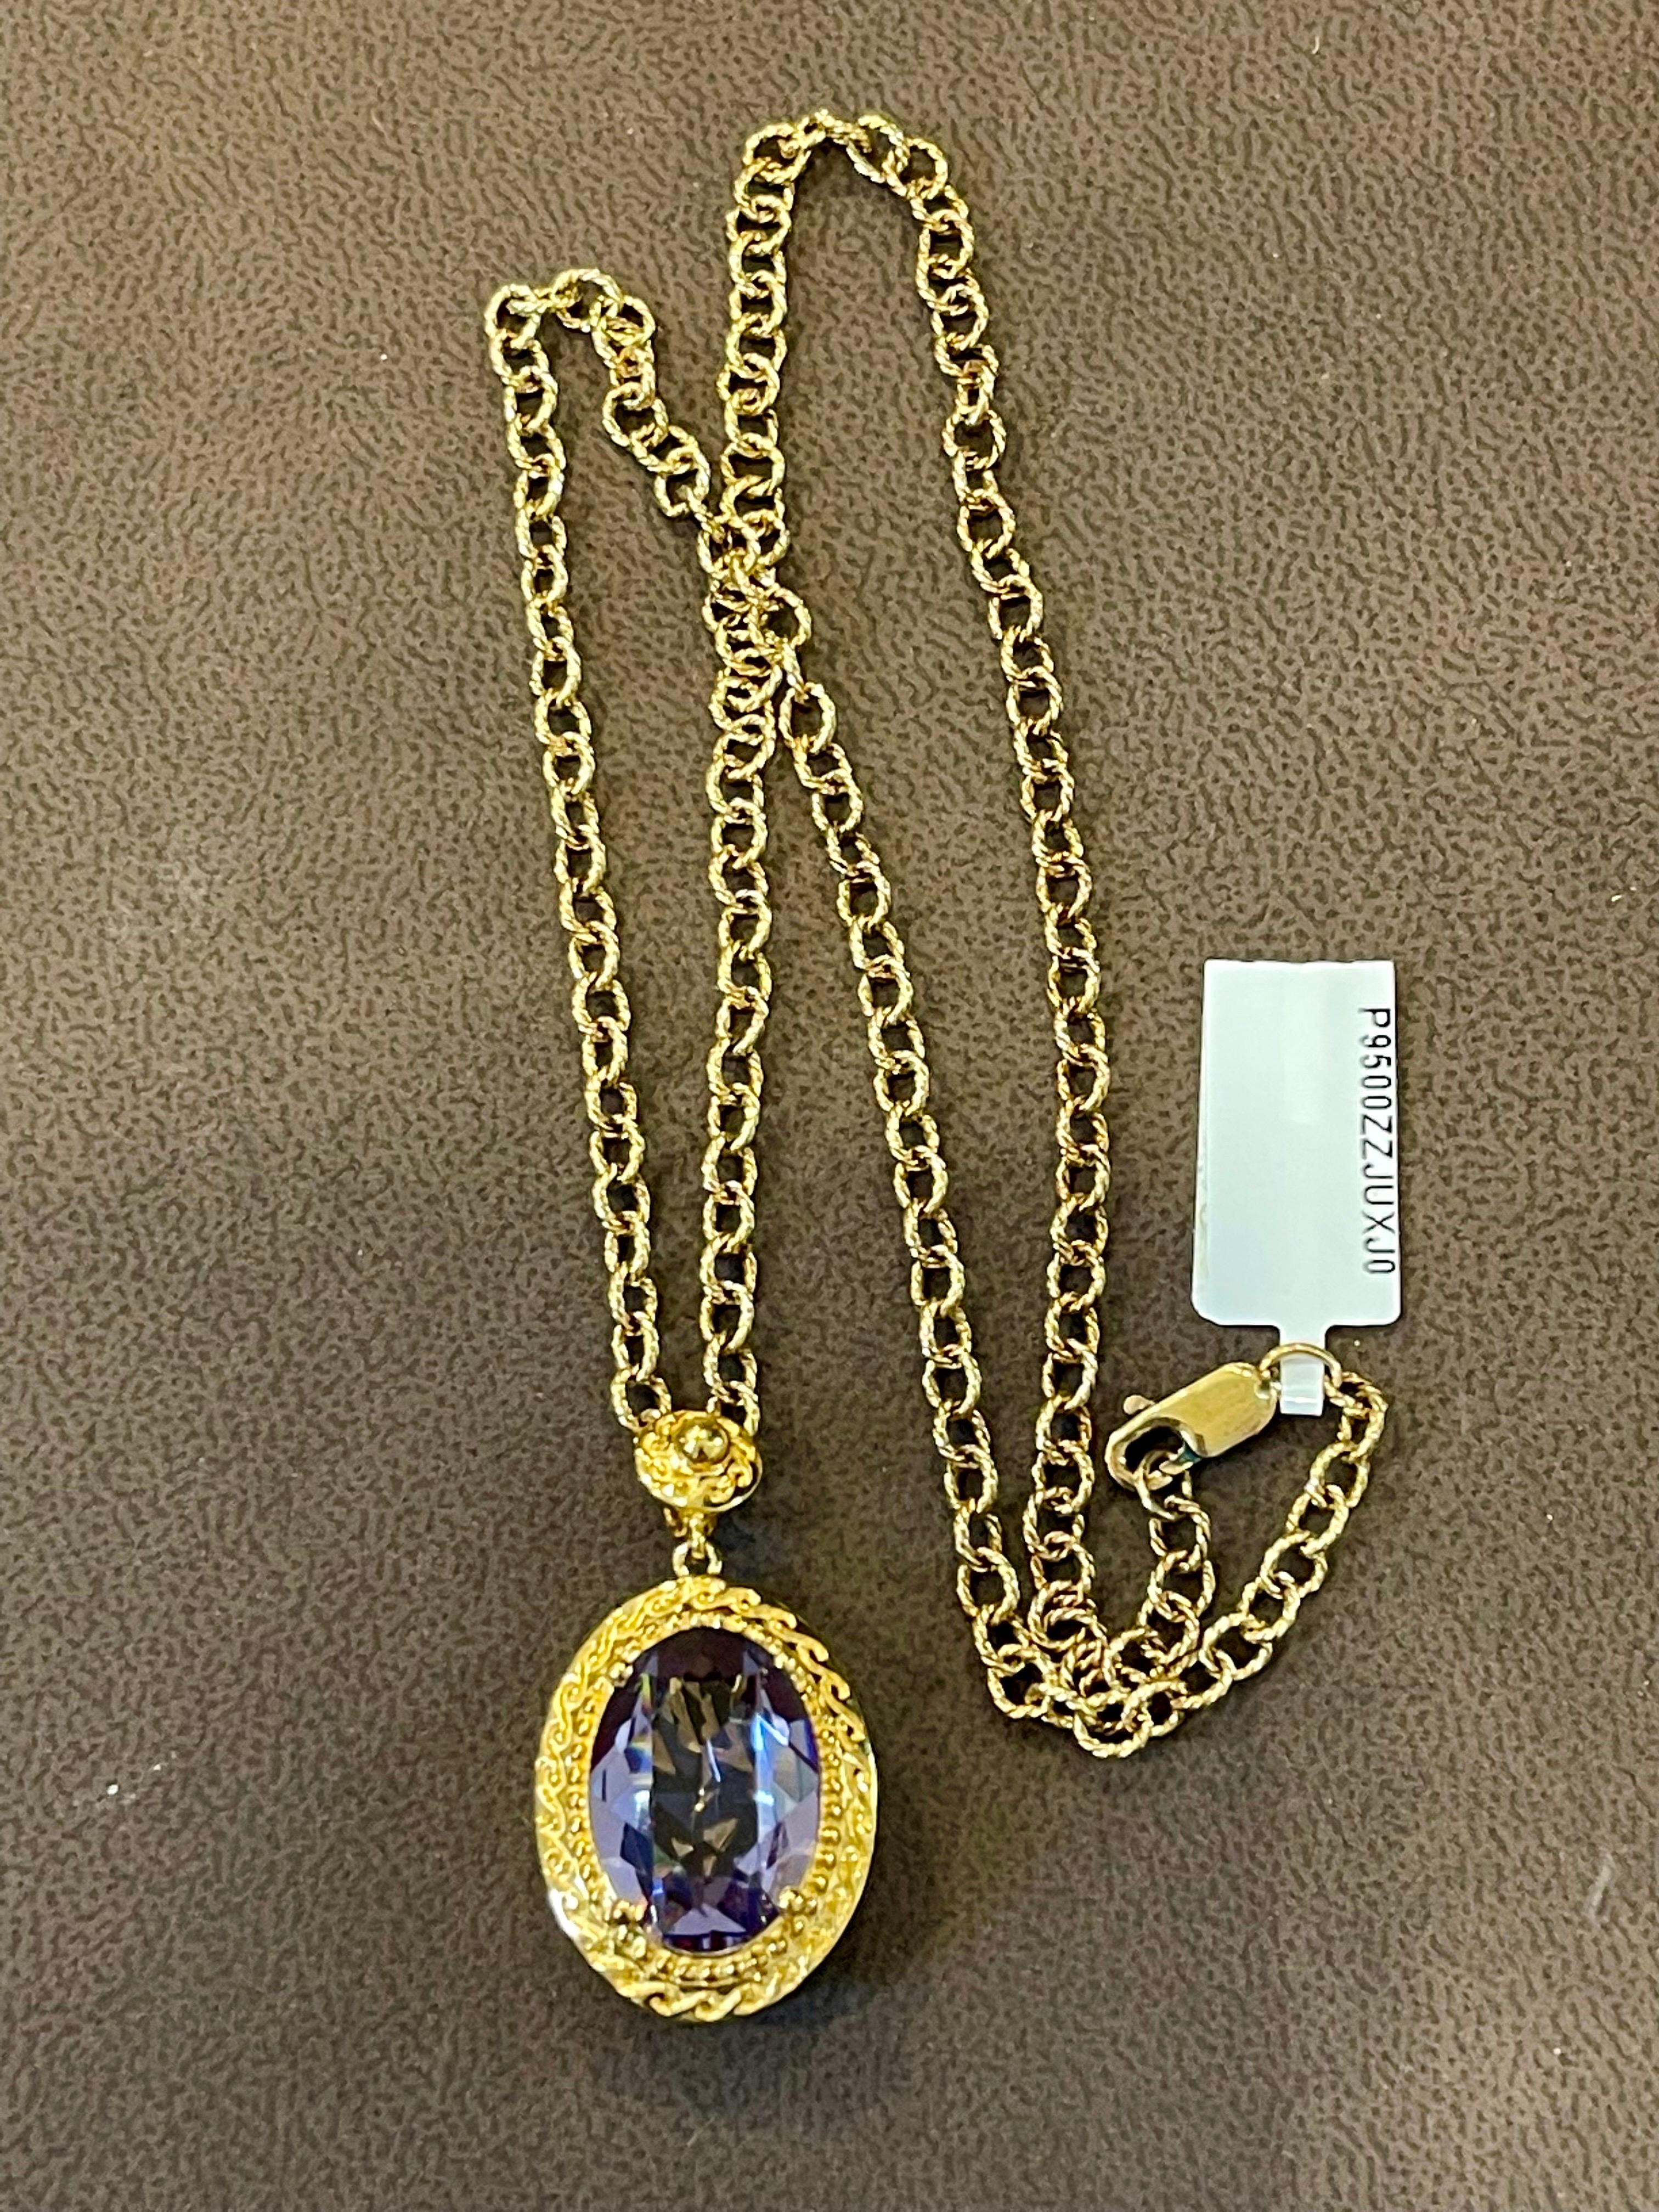 Timeless Elegance Sterling Silver Necklace 18K Vermeil Crystal Tanzanite
This Necklace  is  amazing . Very Fashionable
Pure sterling silver which will not tarnish over time.
19 inch long
It  has yellow gold plating on sterling silver.
Weight of the